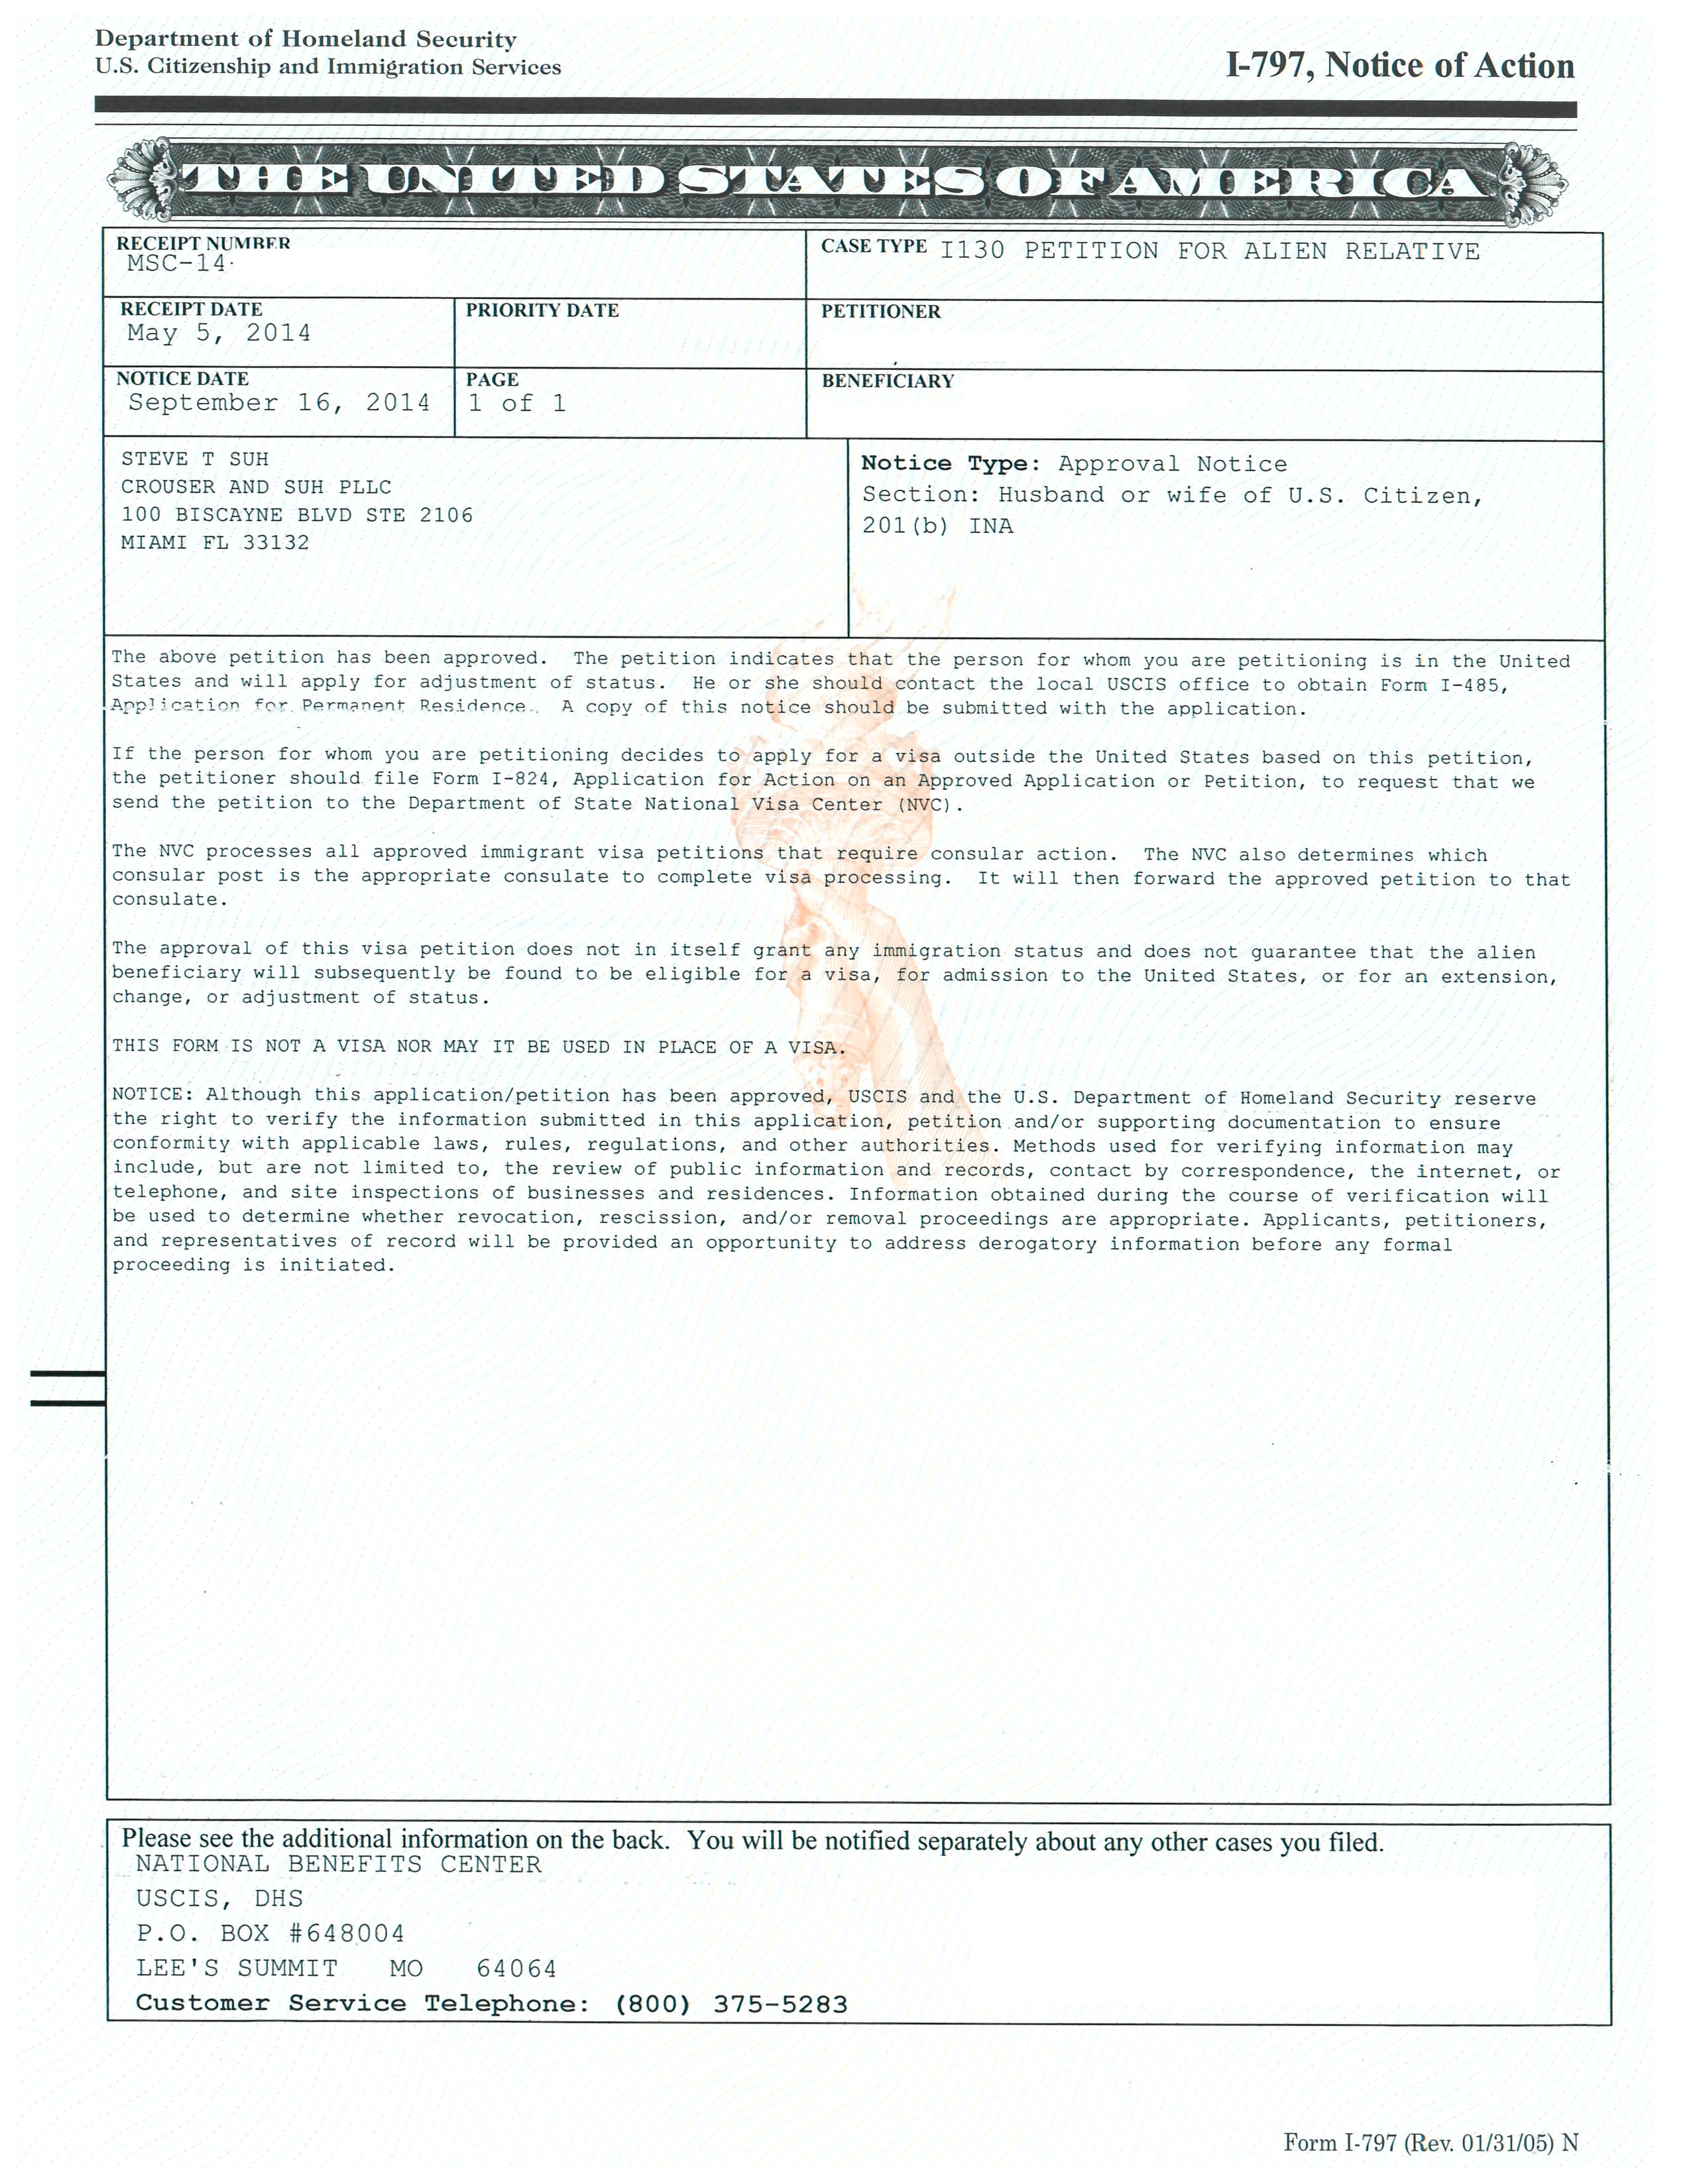 marriagepetitionapprovalnotice09222014(2).jpg